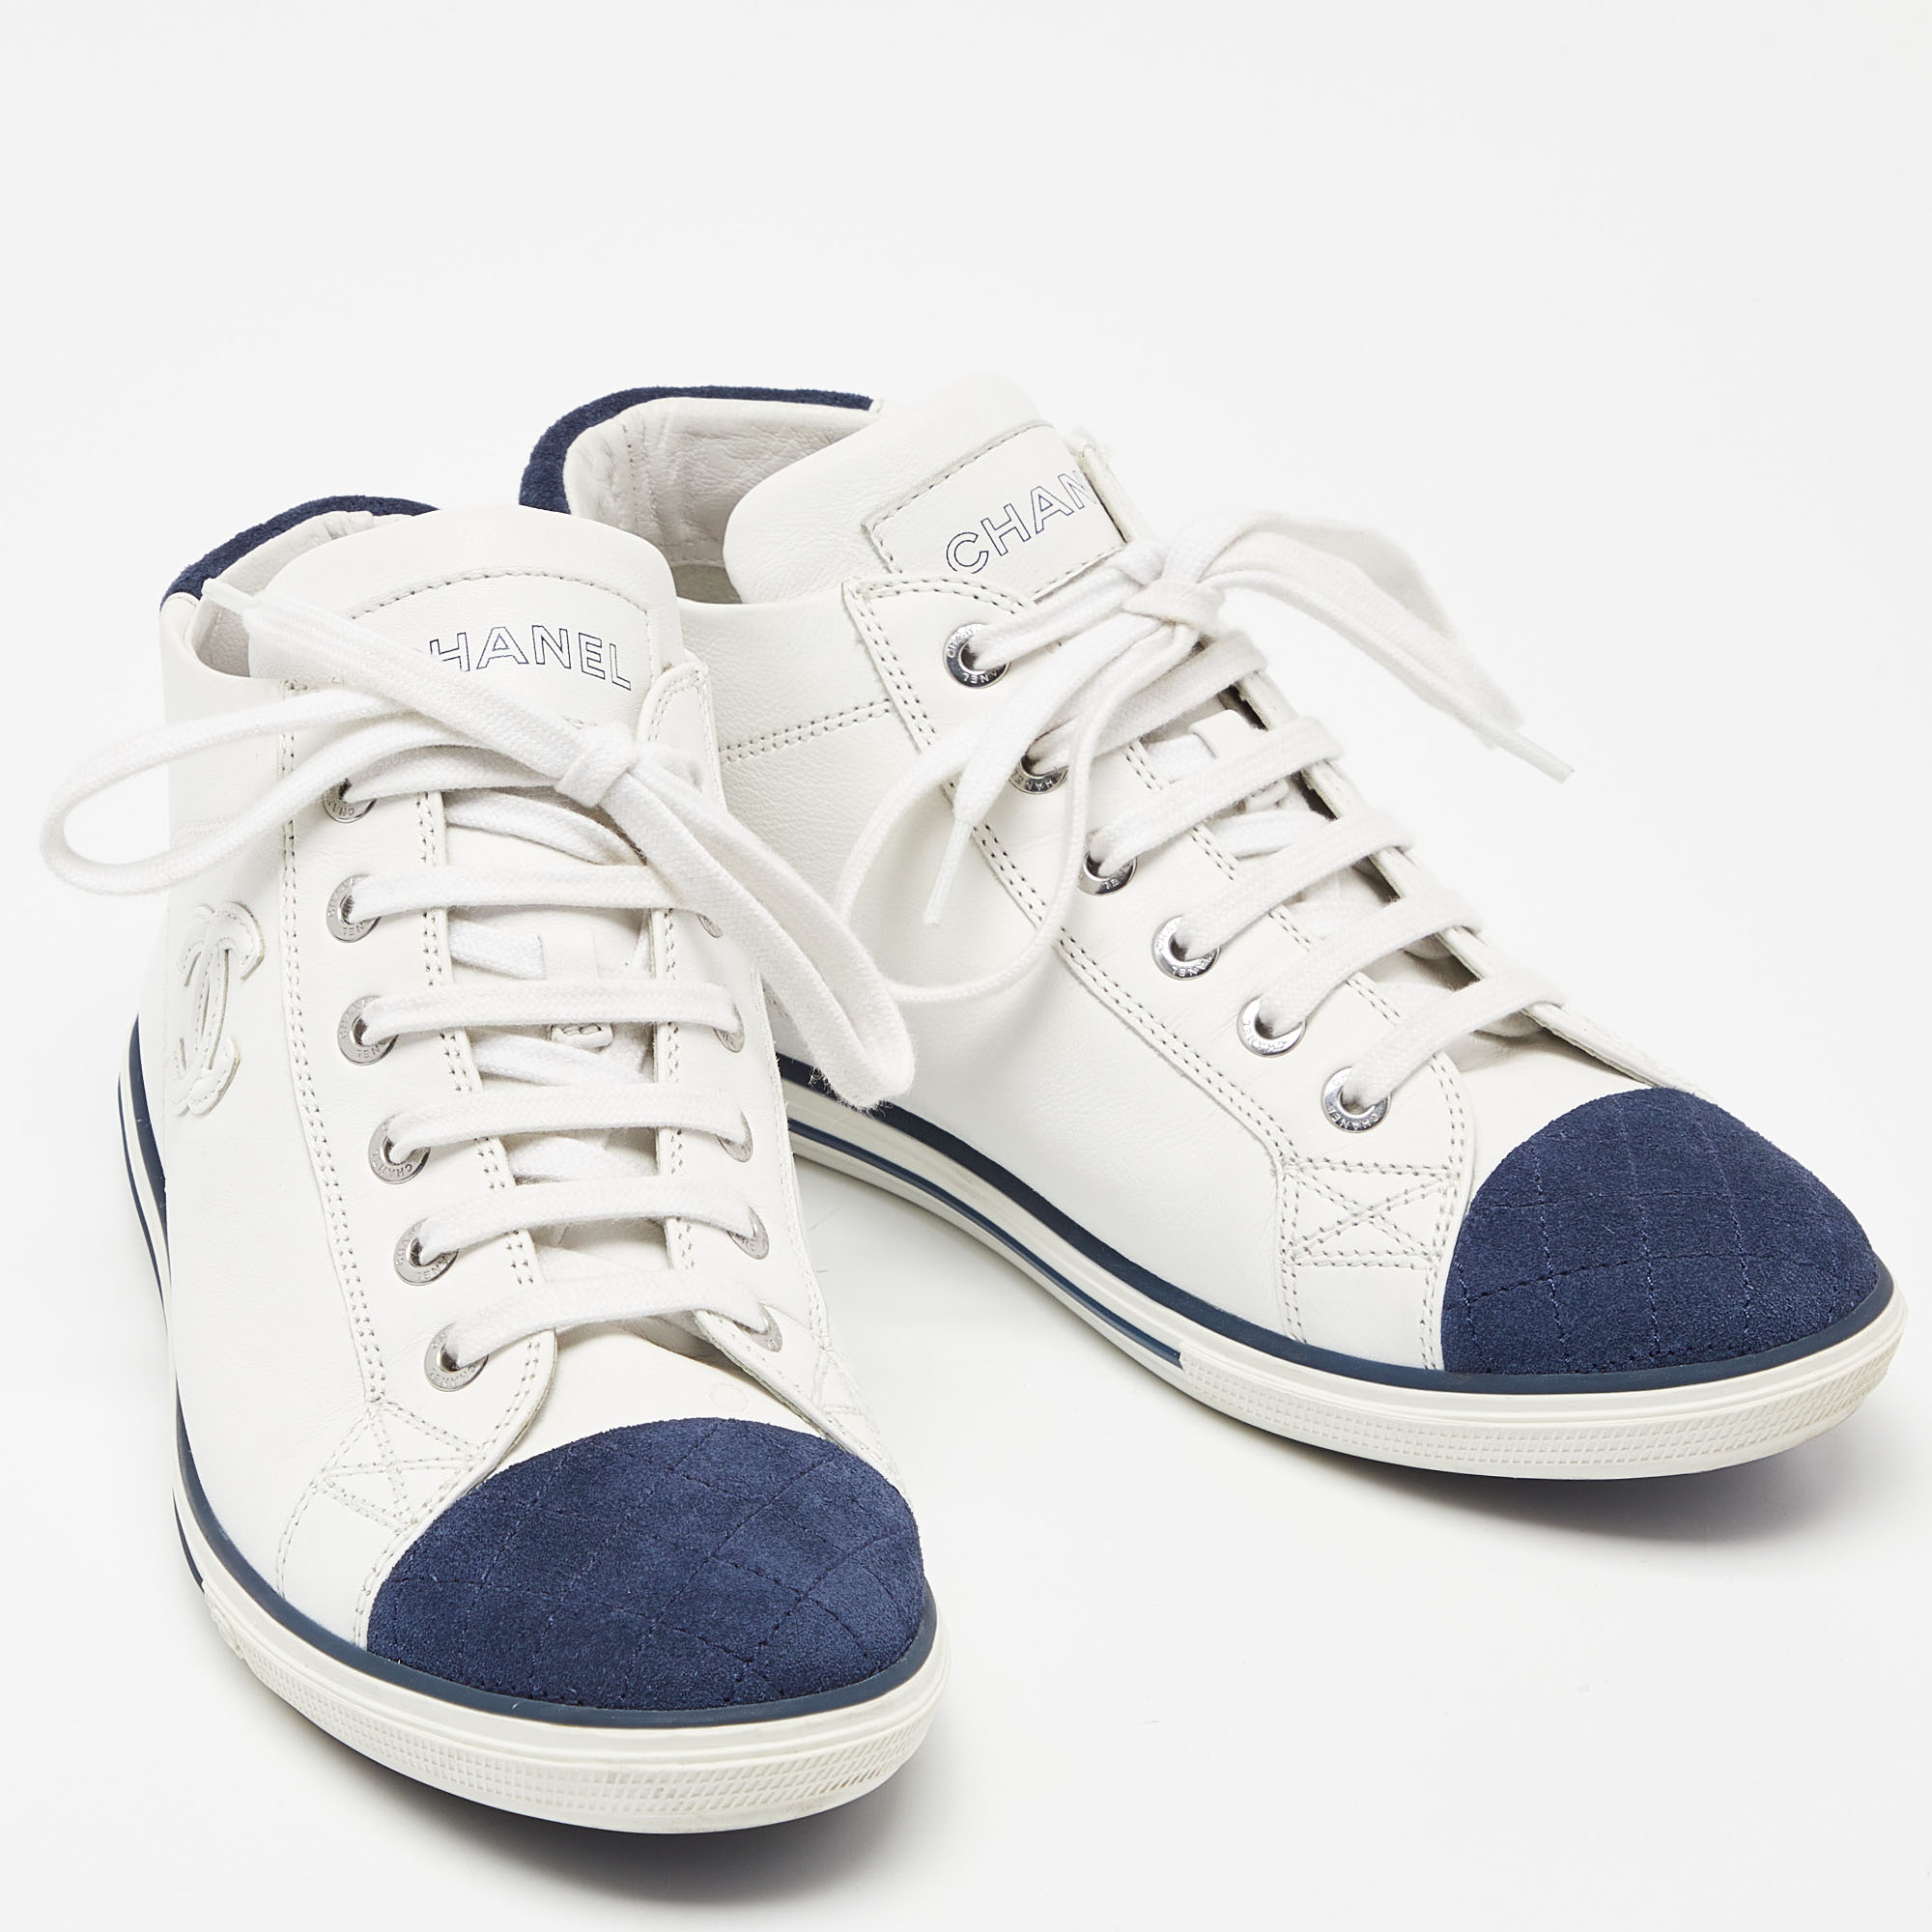 Chanel White/Blue Leather And Suede Lace Up High Top Sneakers Size 36